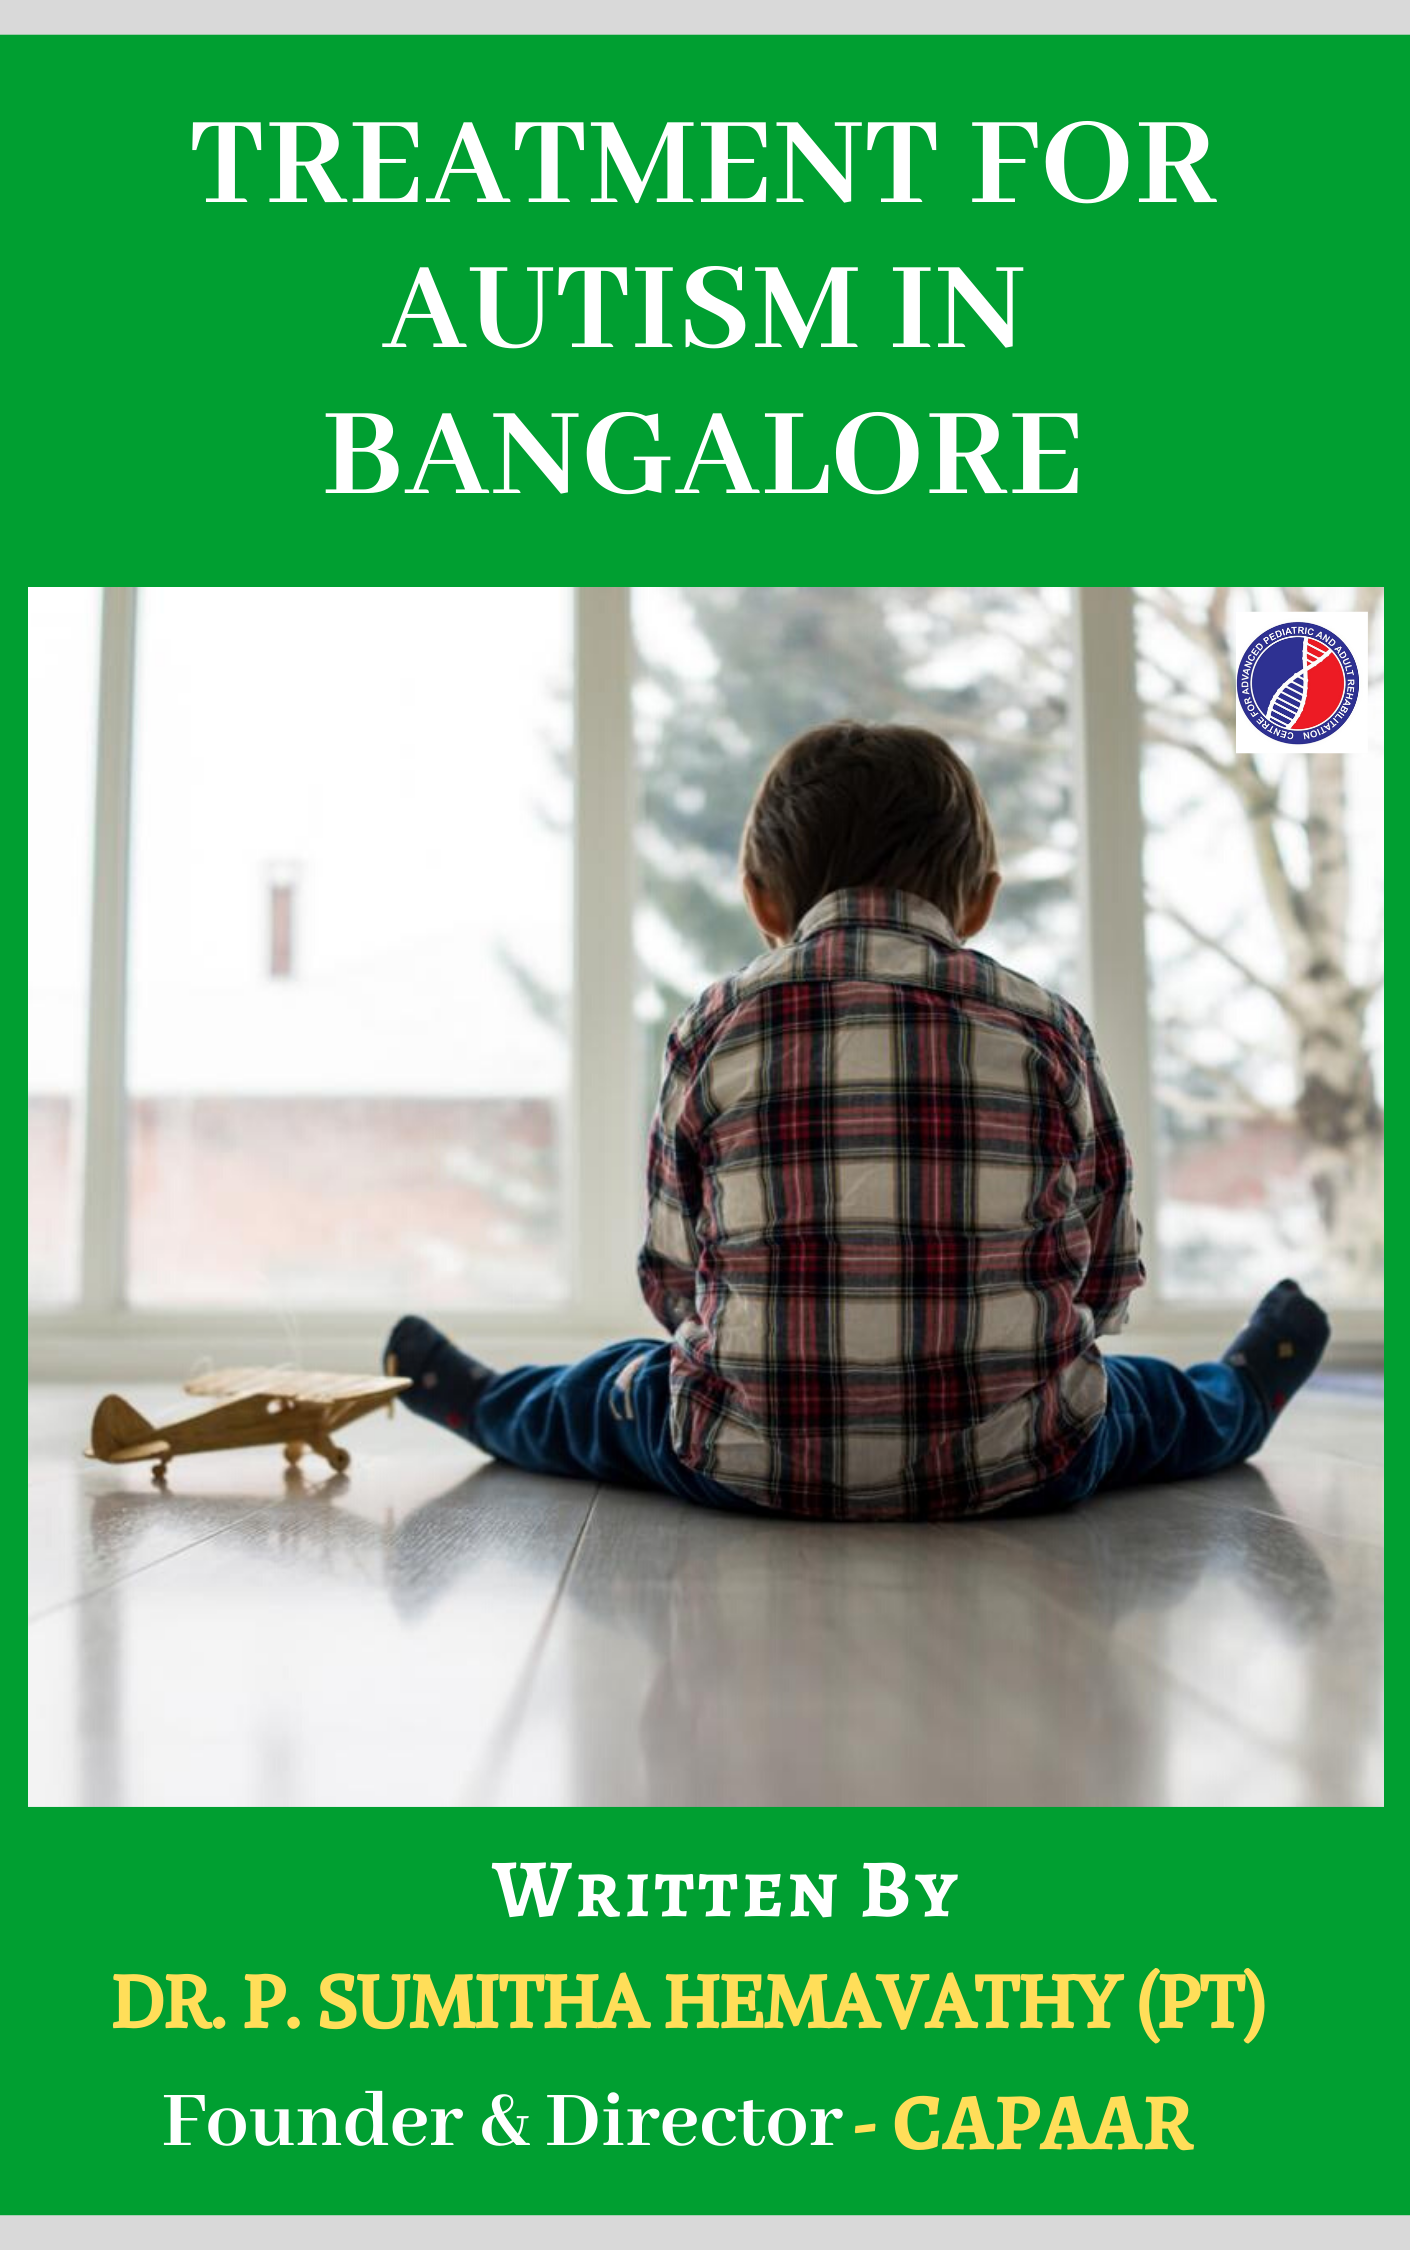 Treatment for Autism in Bangalore